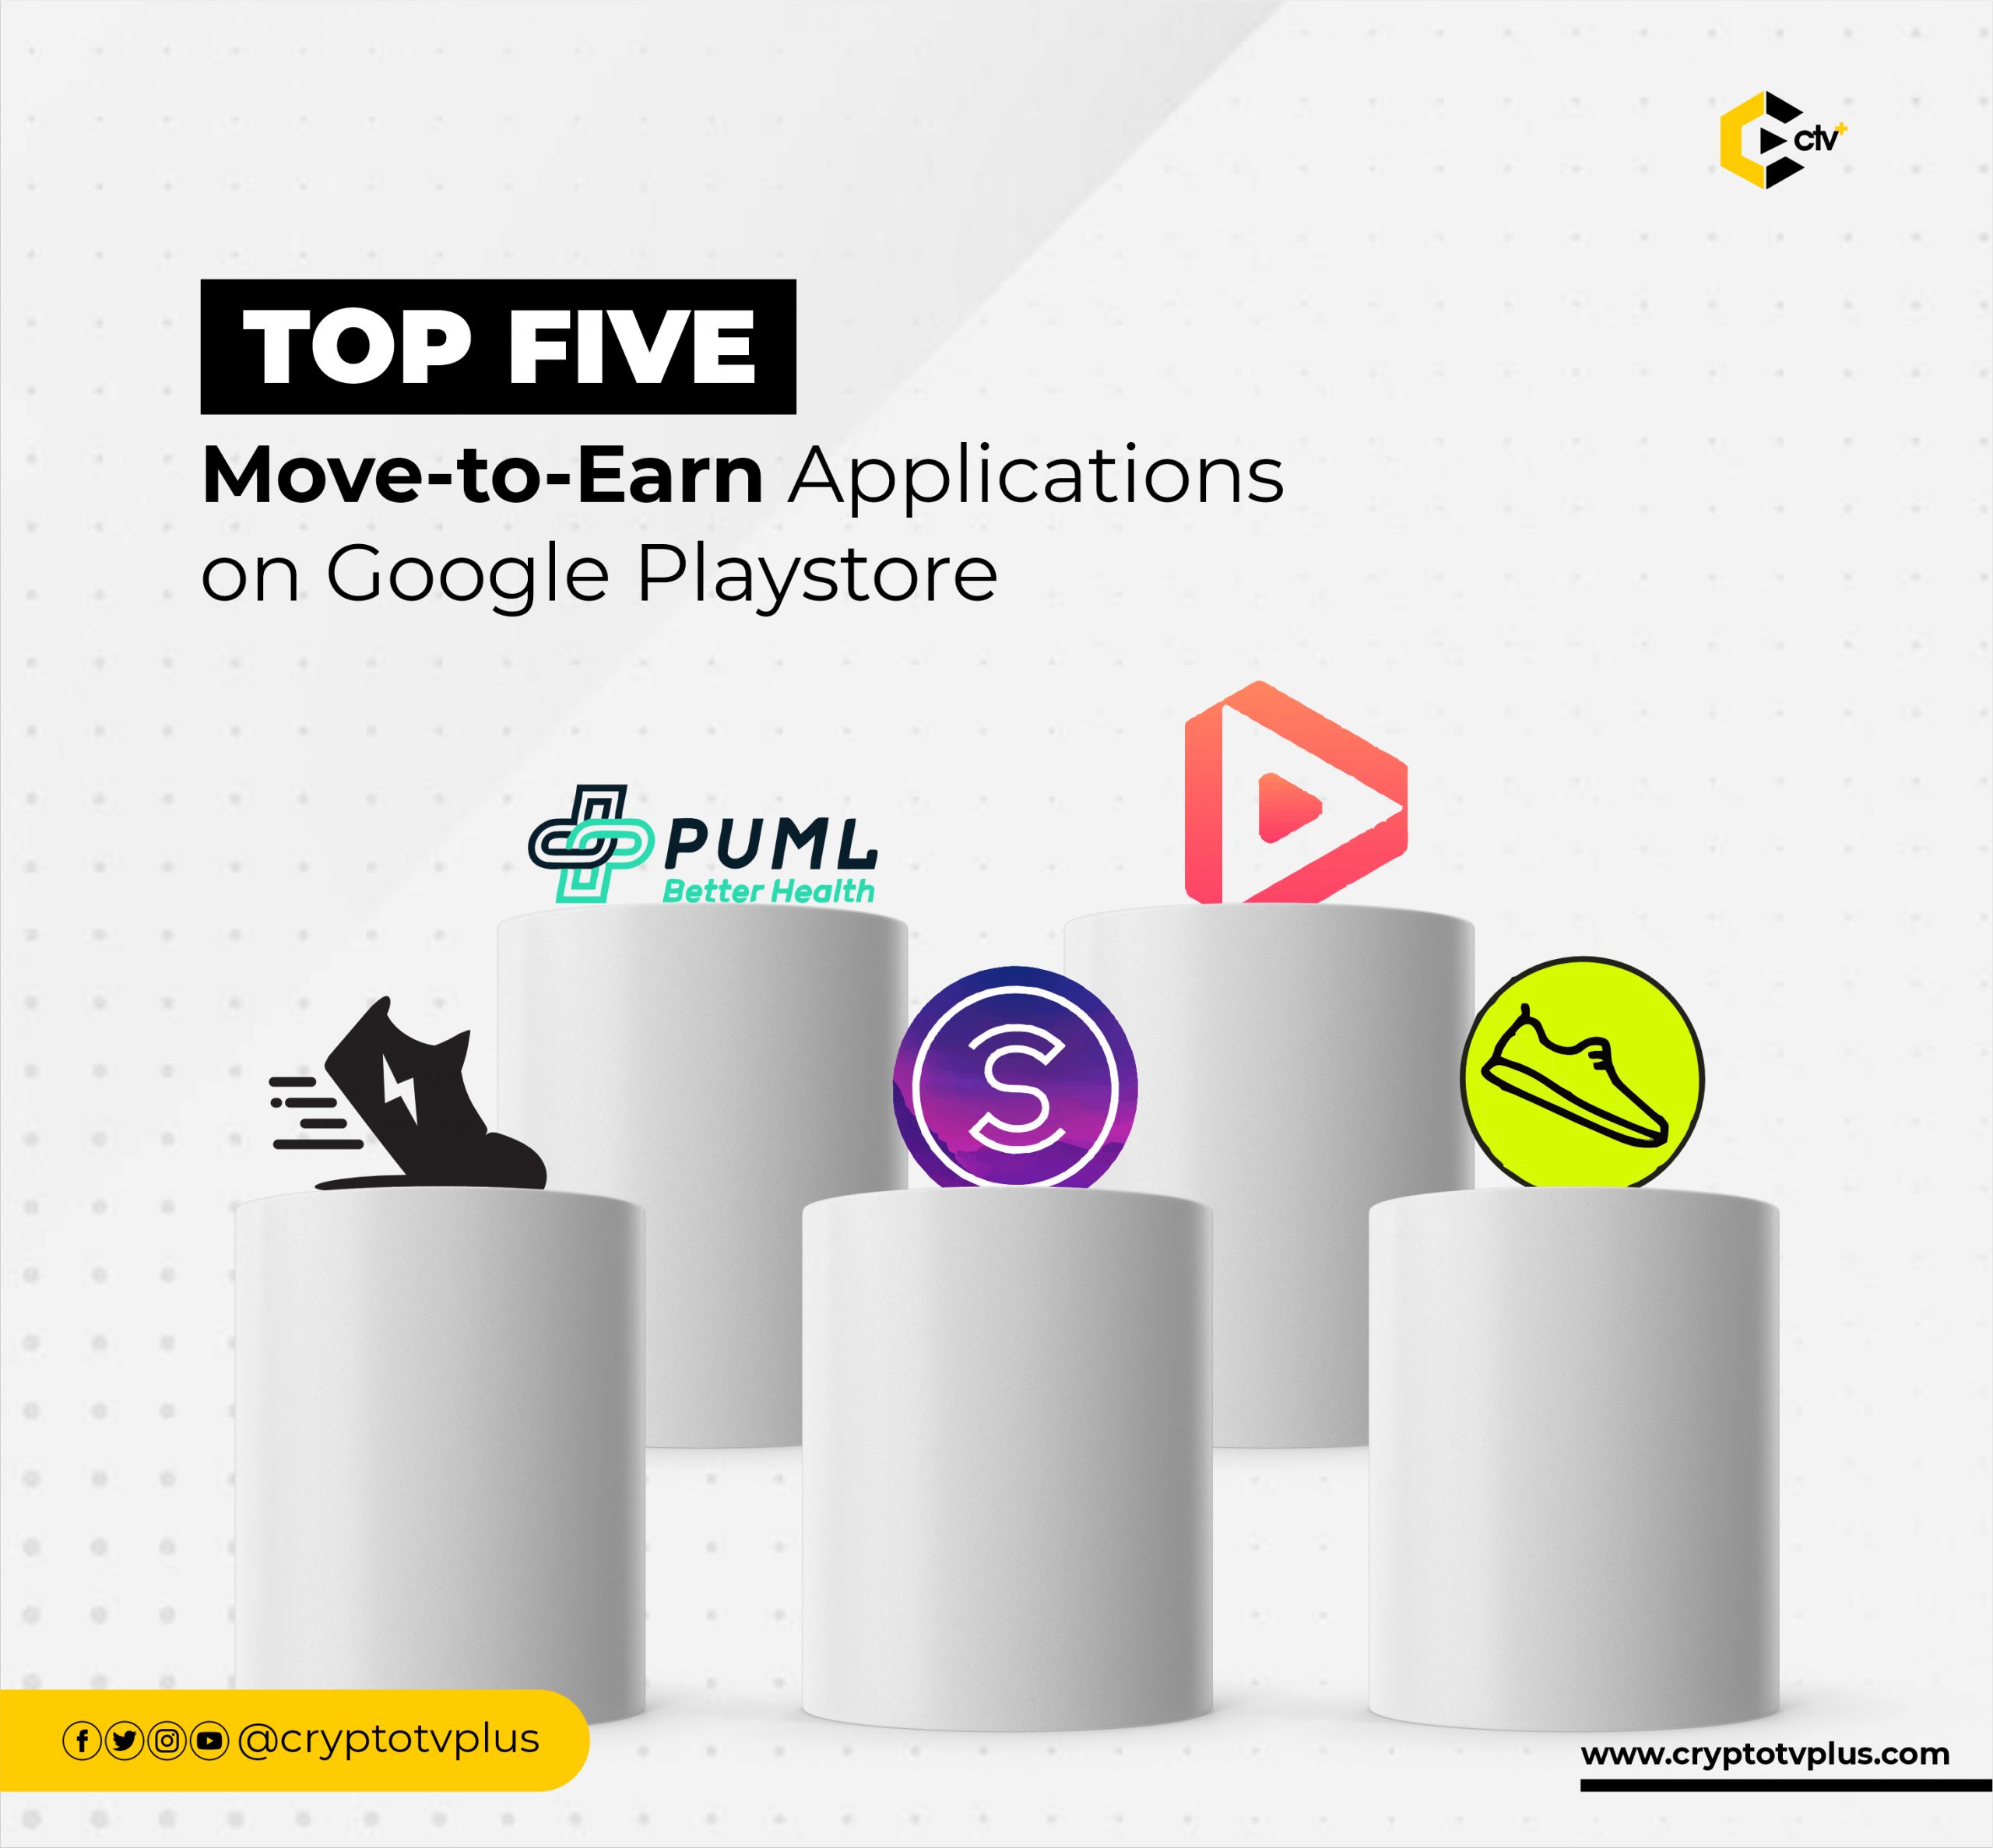 https://cryptotvplus.com/wp-content/uploads/2022/05/Top-5-Move-to-Earn-Applications-on-Google-Playstore-scaled.jpg